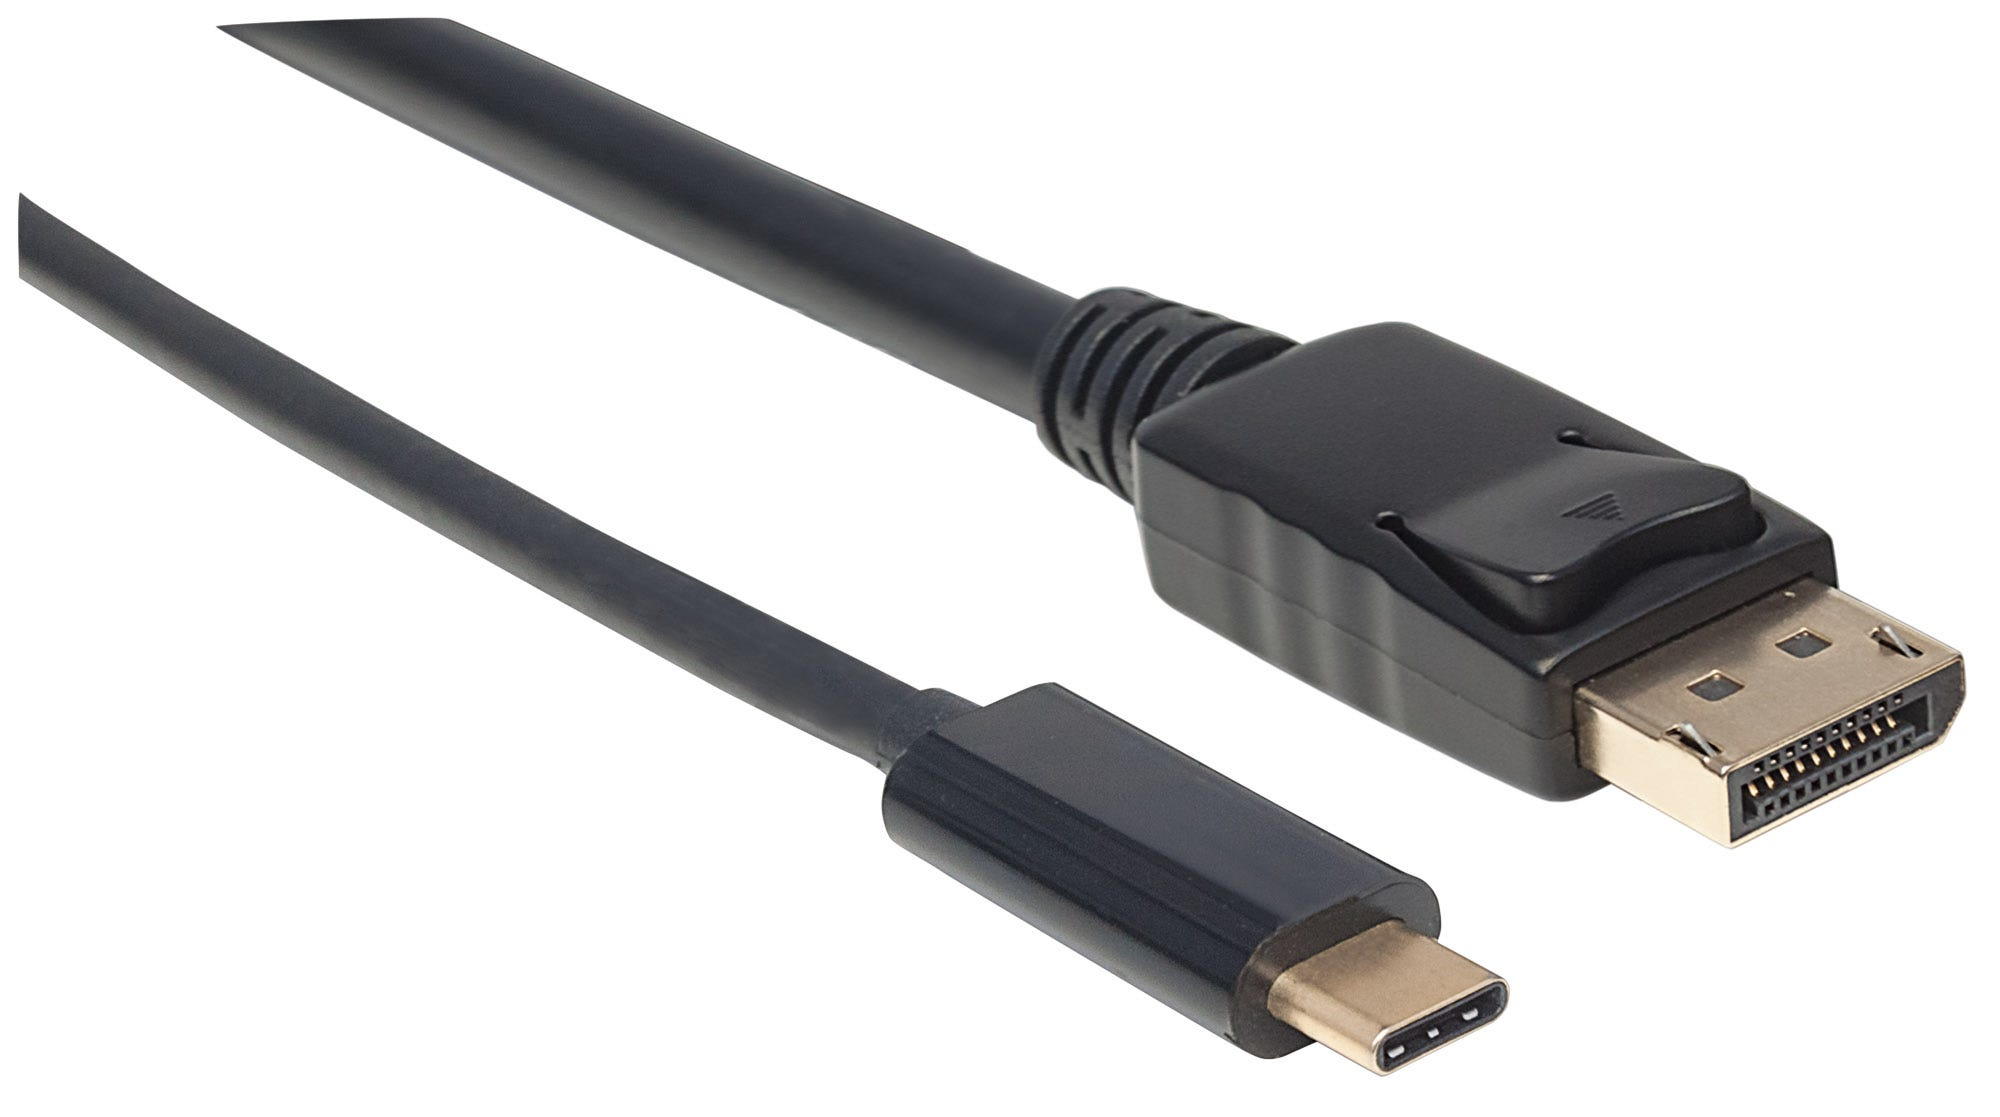 Manhattan USB-C to DisplayPort Cable, 4K@60Hz, 1m, Male to Male, Black, Equivalent to Startech CDP2DP1MBD, Three Year Warranty, Polybag